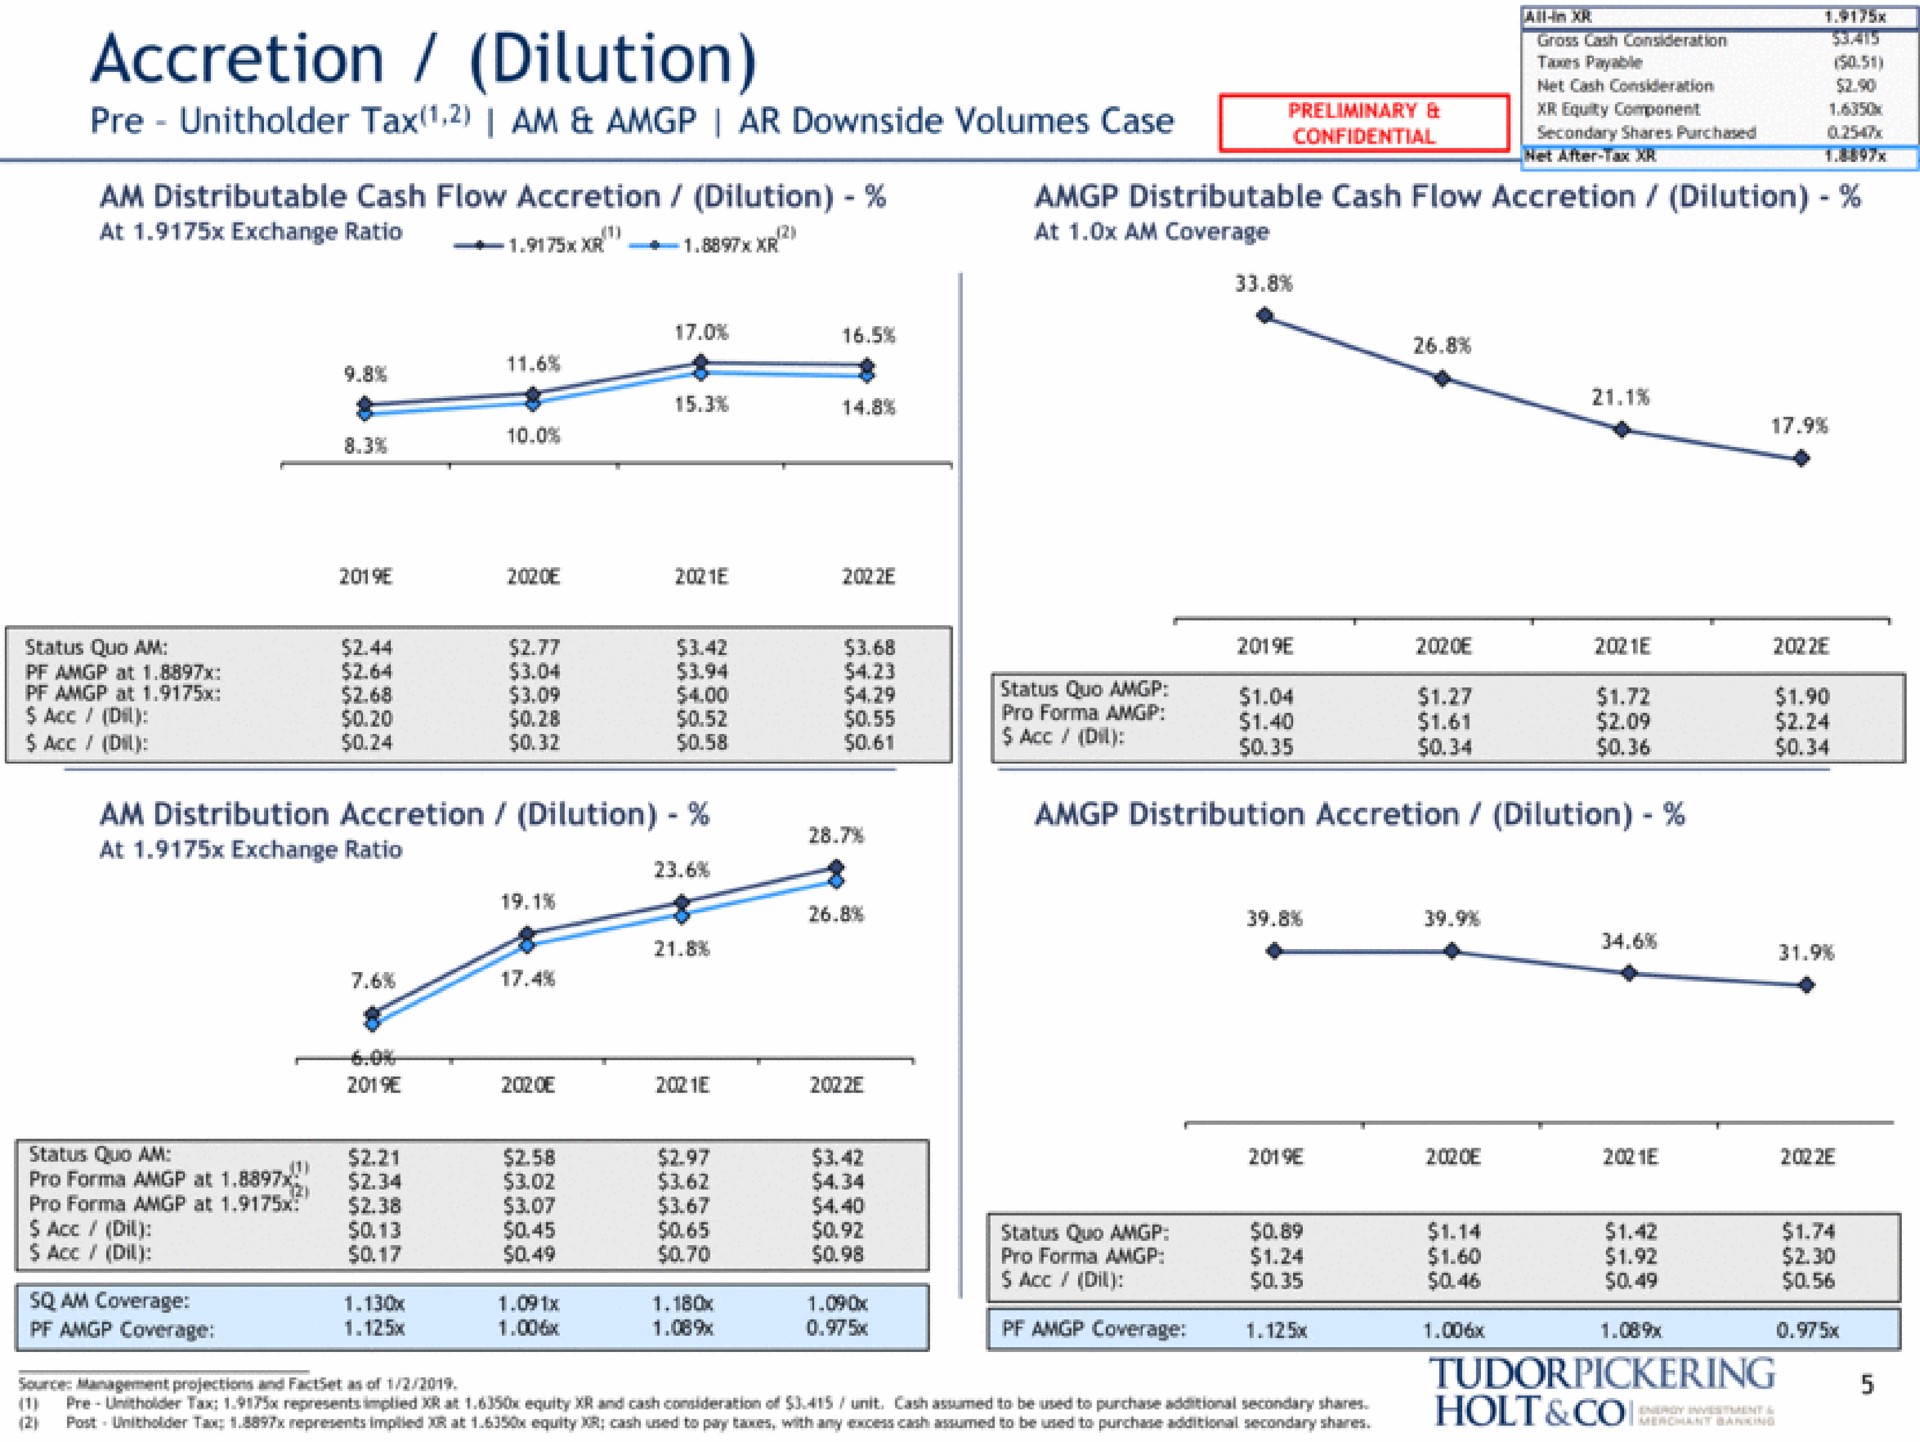 accretion dilution tax am downside volumes case teer pro at holt | Tudor, Pickering, Holt & Co